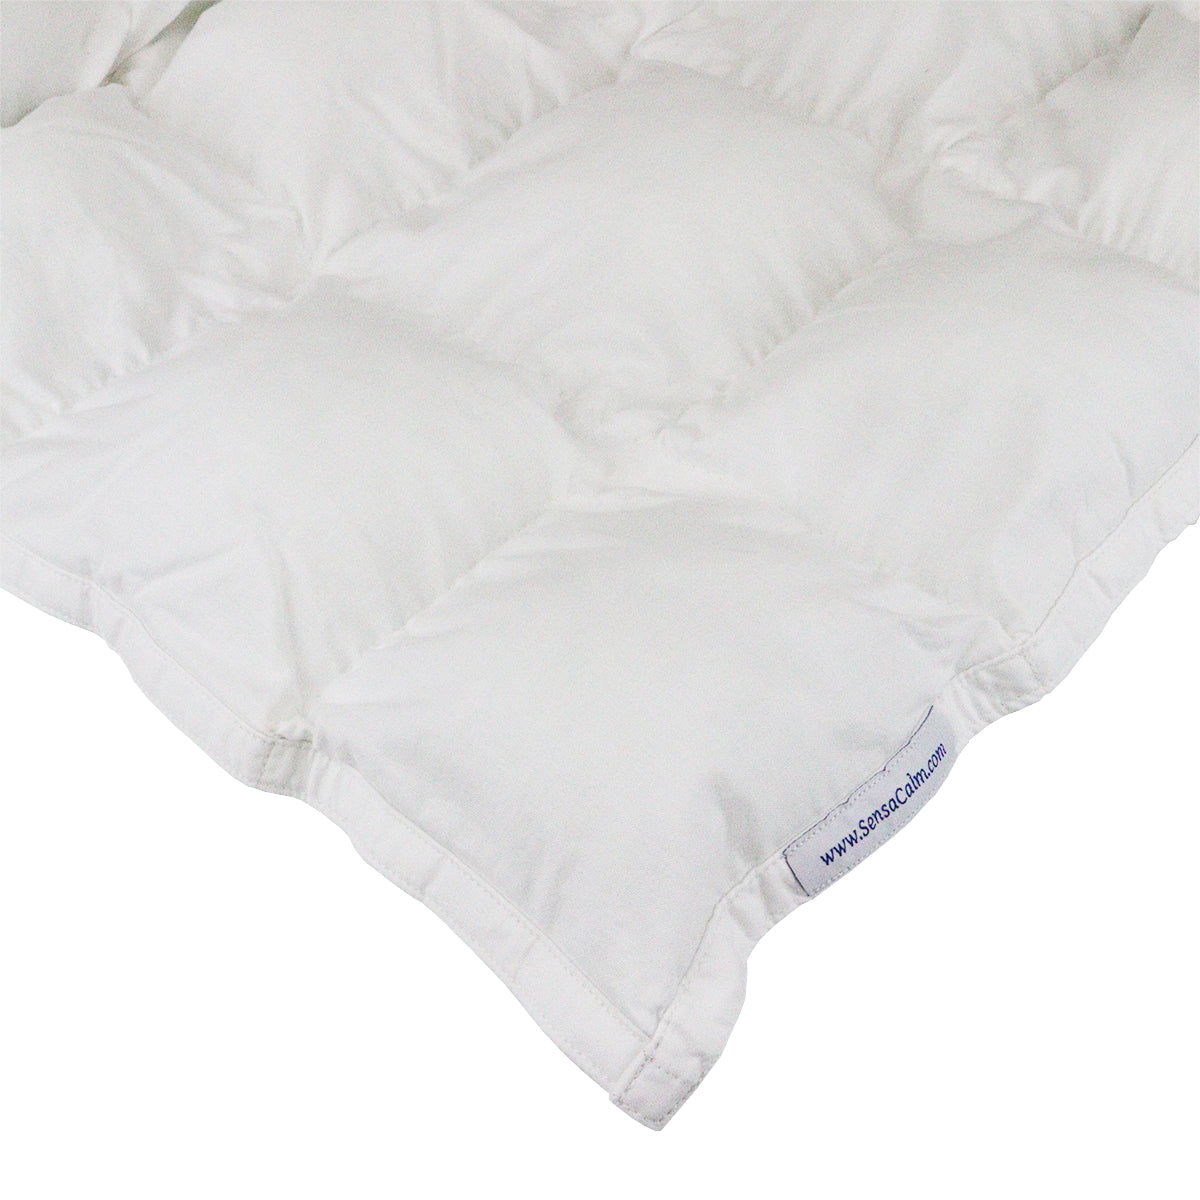 Clearance Weighted Blanket - Large 18 lb White (for 150 lb user)